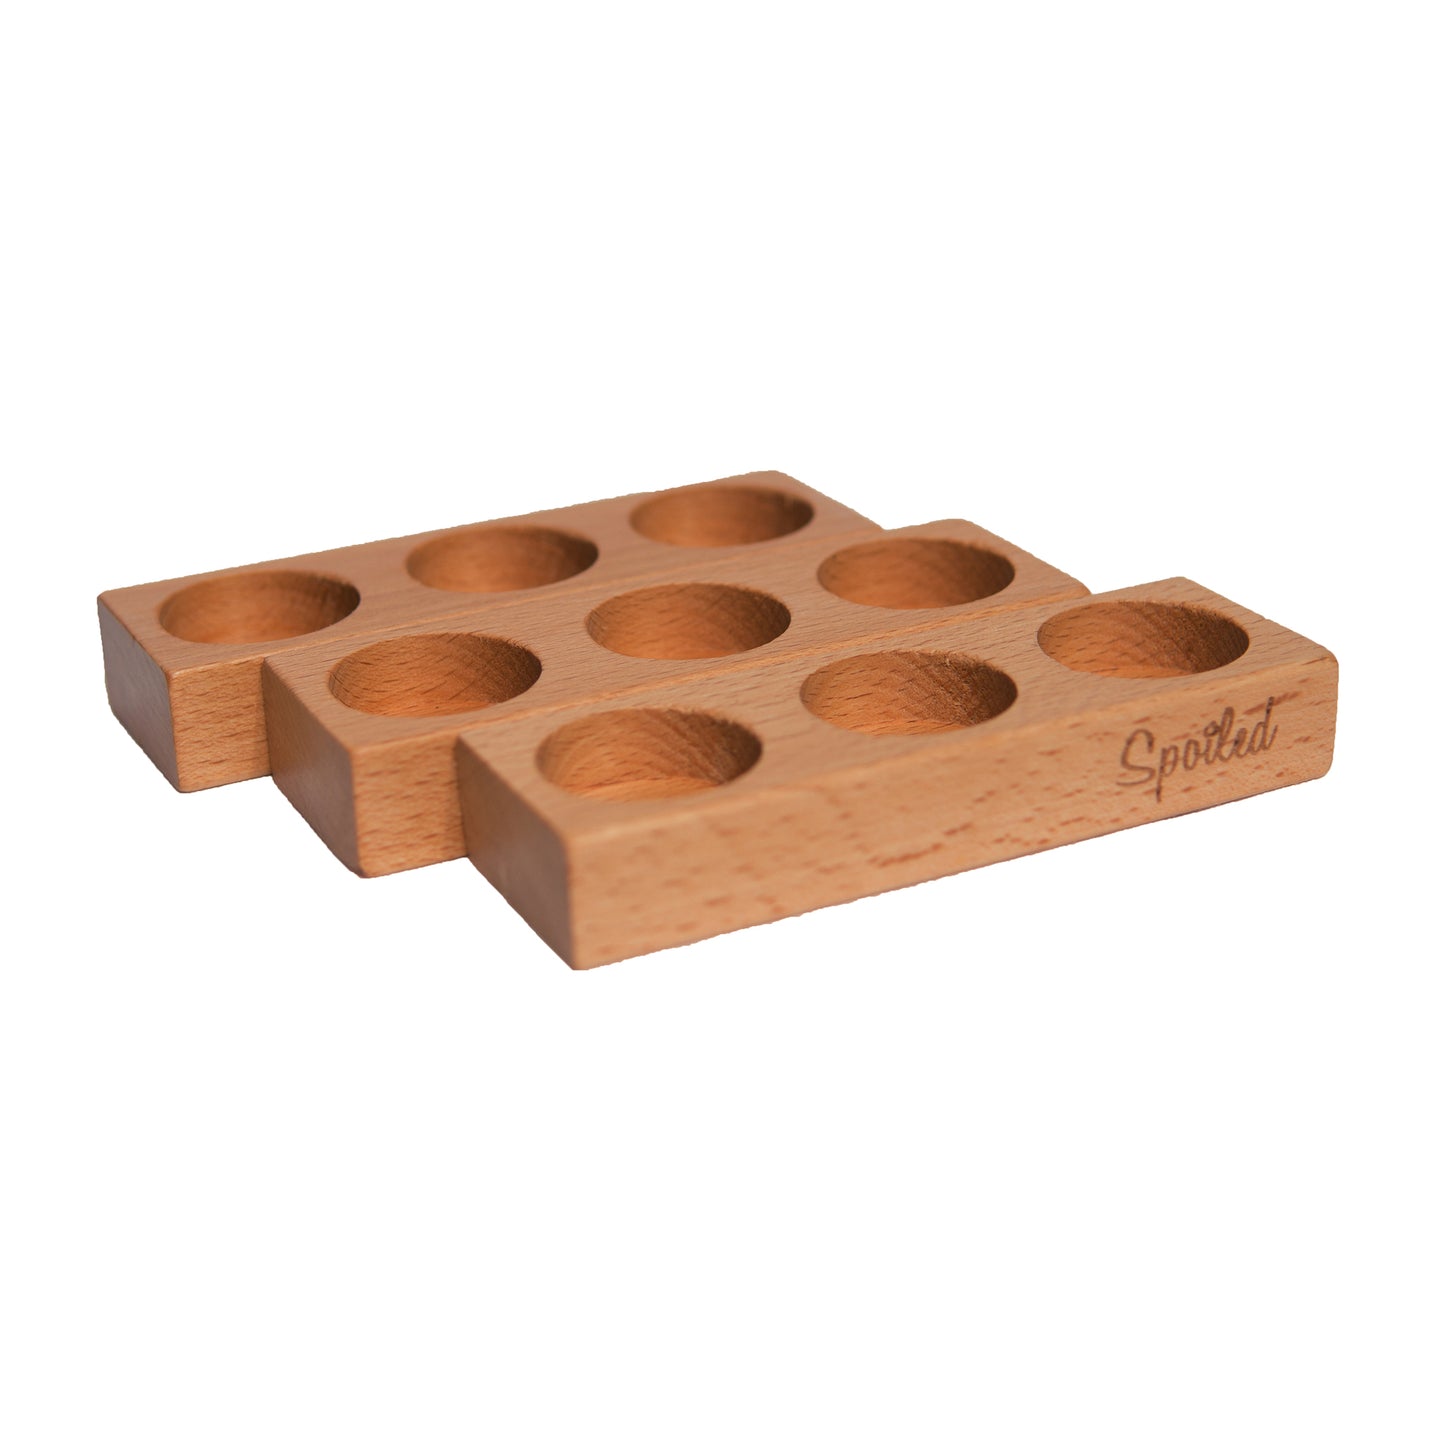 Spoiled wooden block (3 holes)